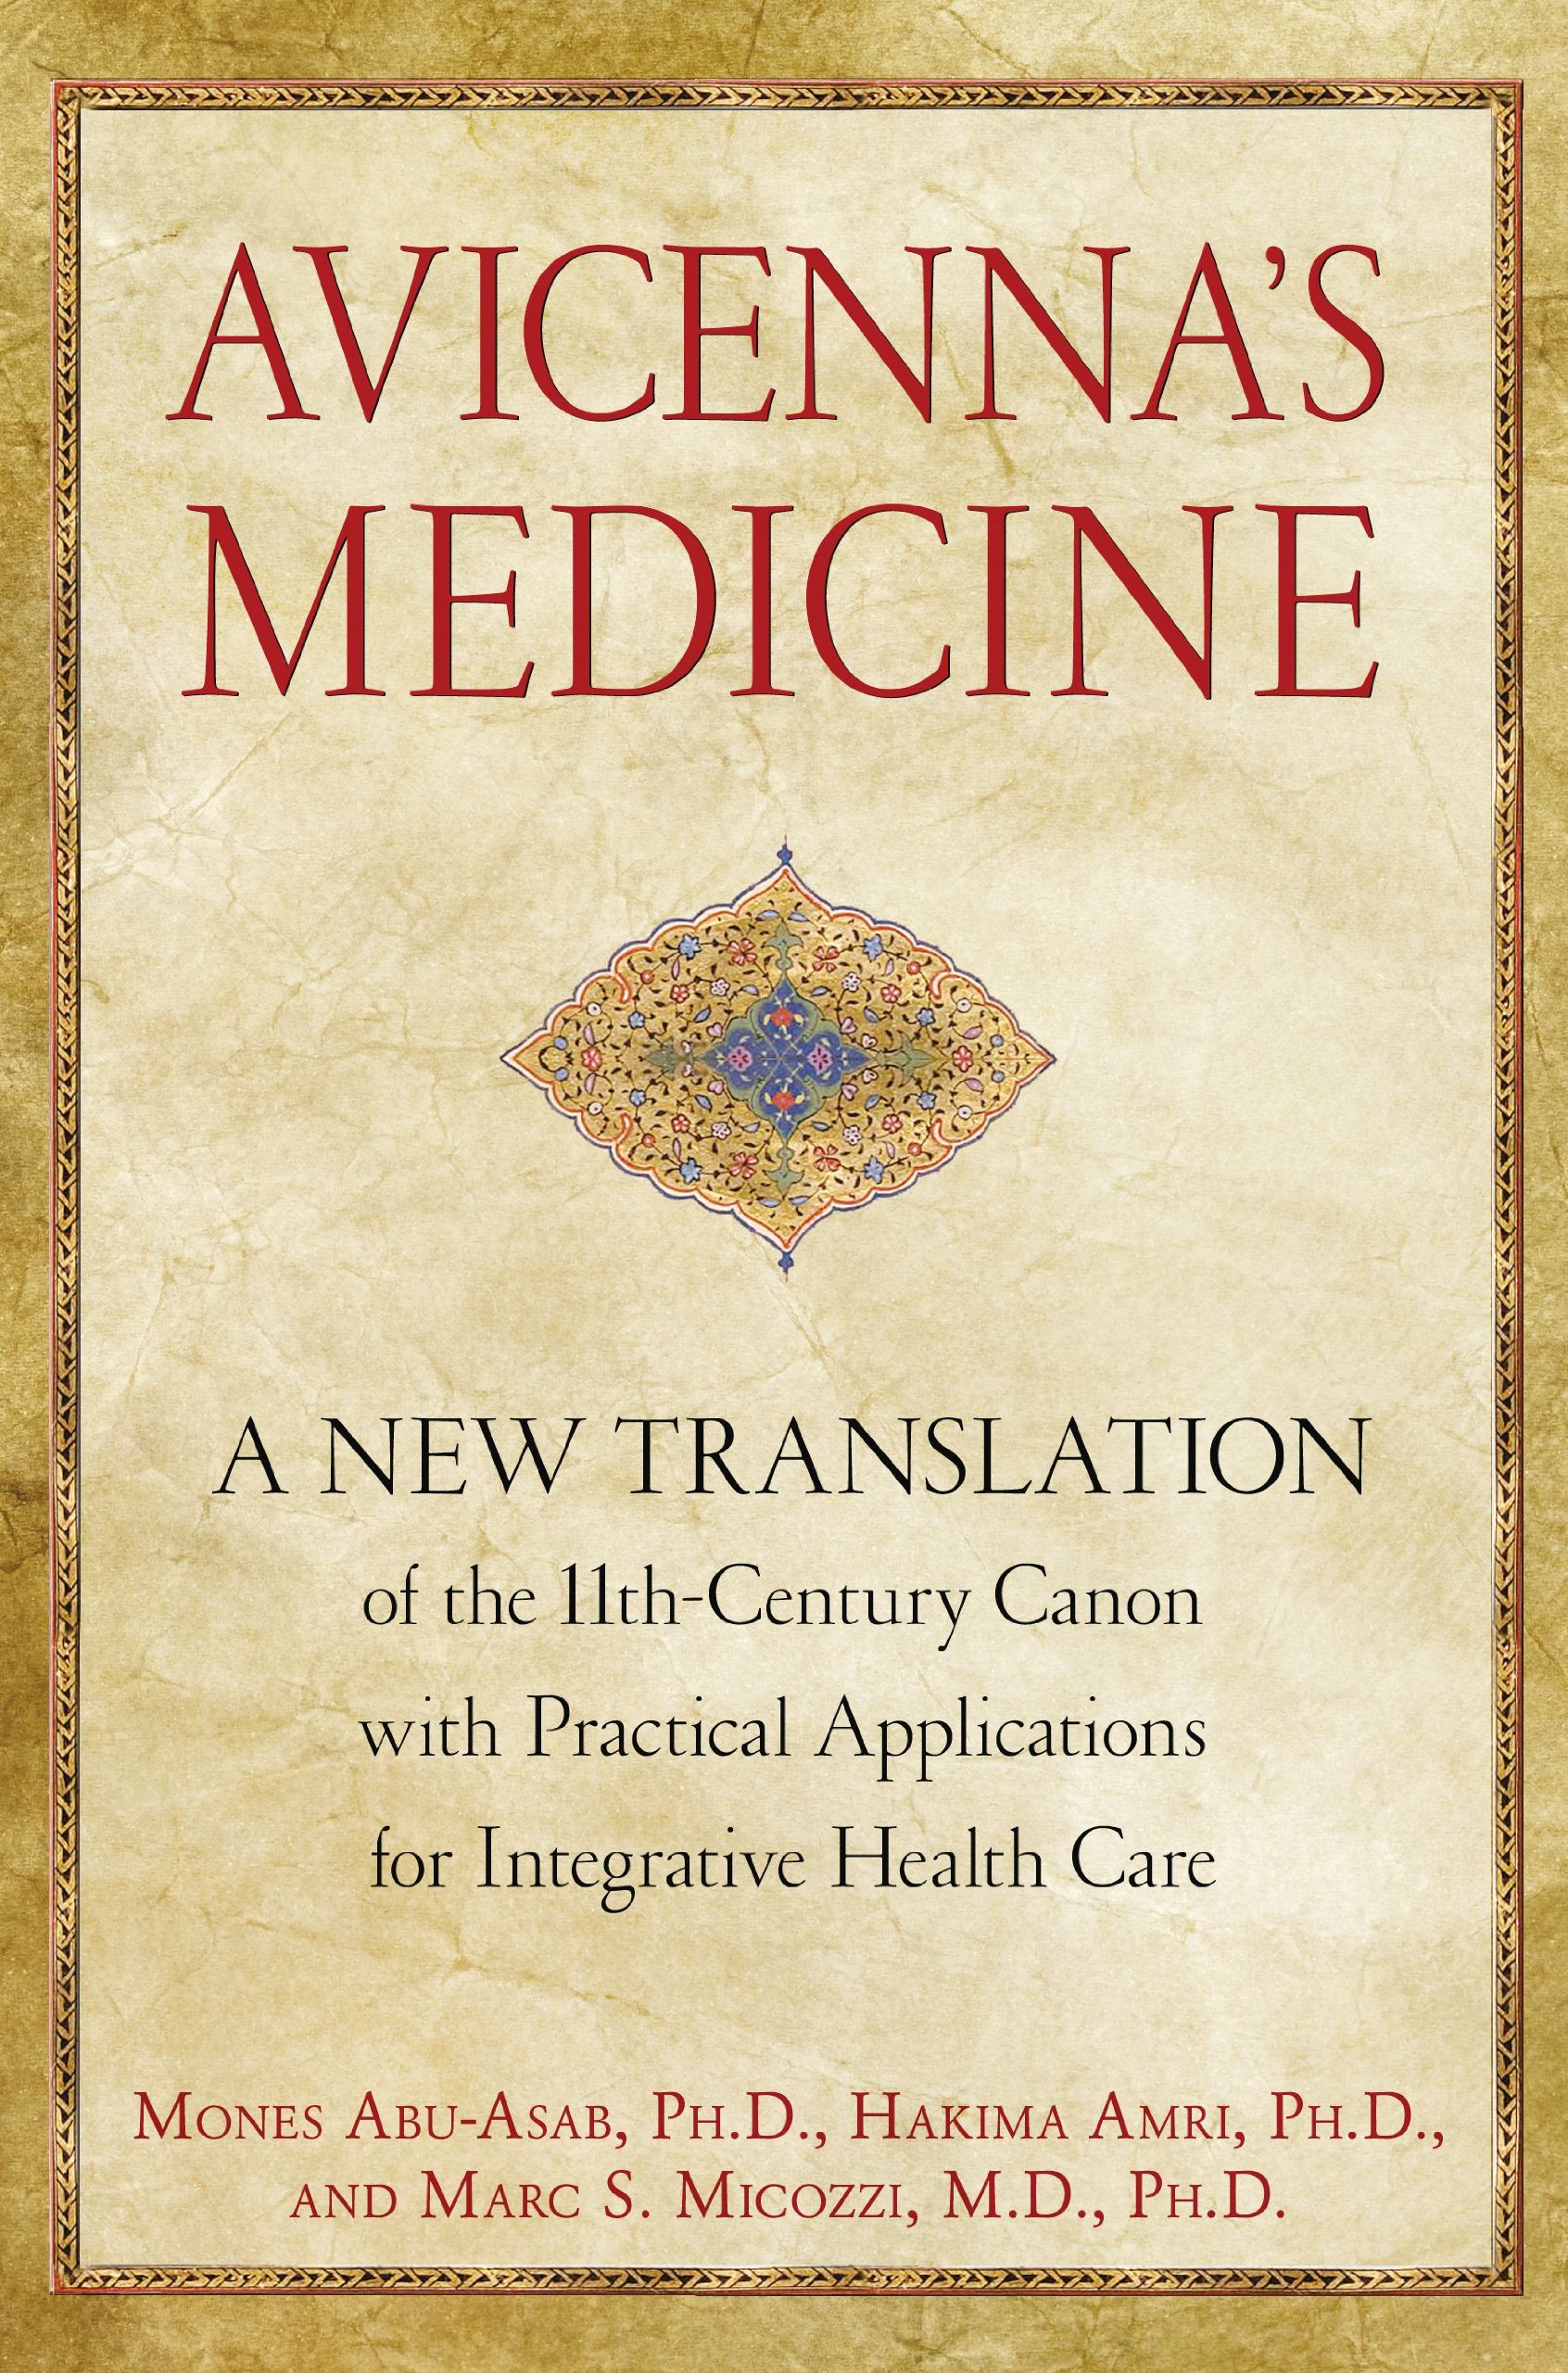 Book Cover Avicenna's Medicine: A New Translation of the 11th-Century Canon with Practical Applications for Integrative Health Care